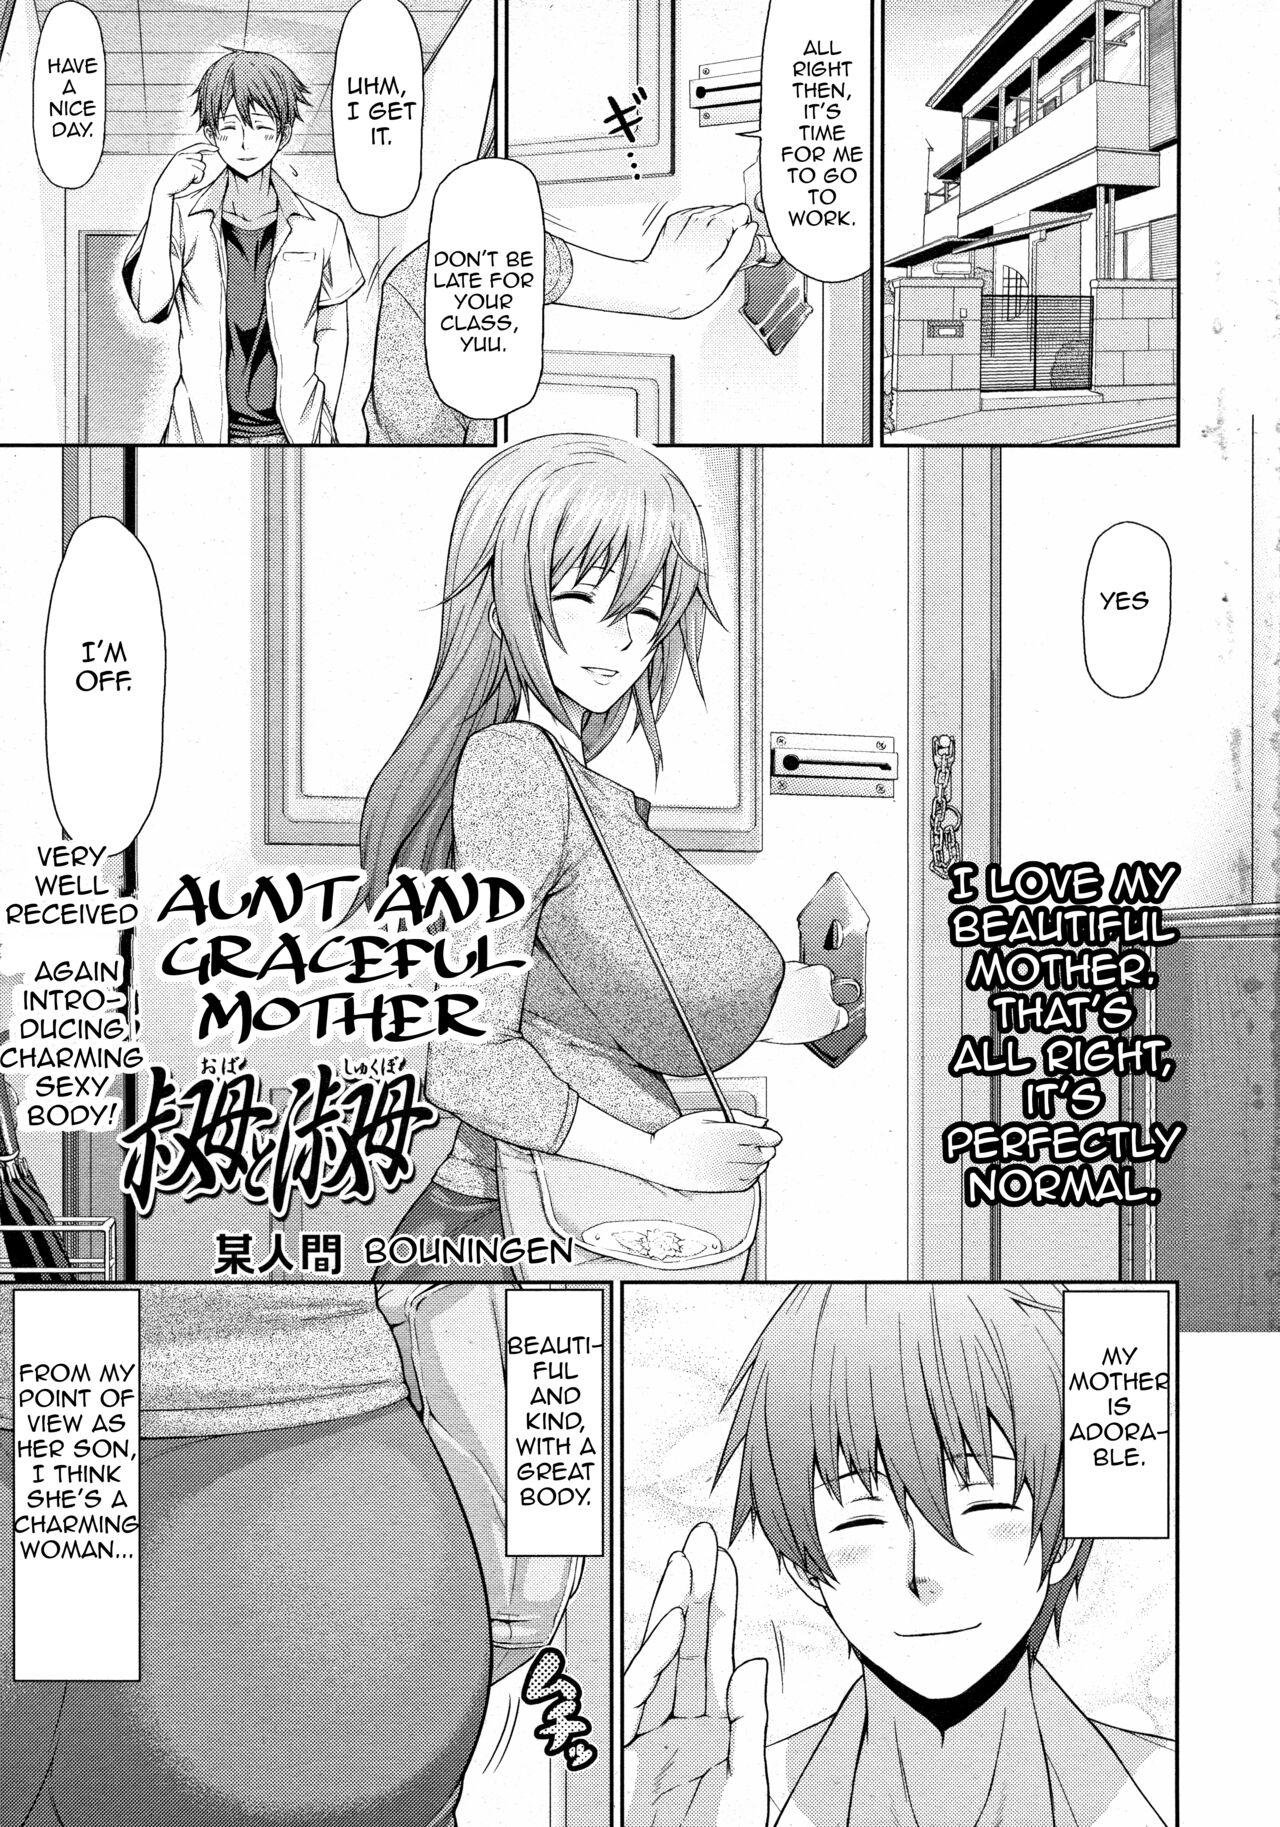 Hotel Oba to Shukubo | Aunt and Graceful Mother Blowjob Porn - Page 1